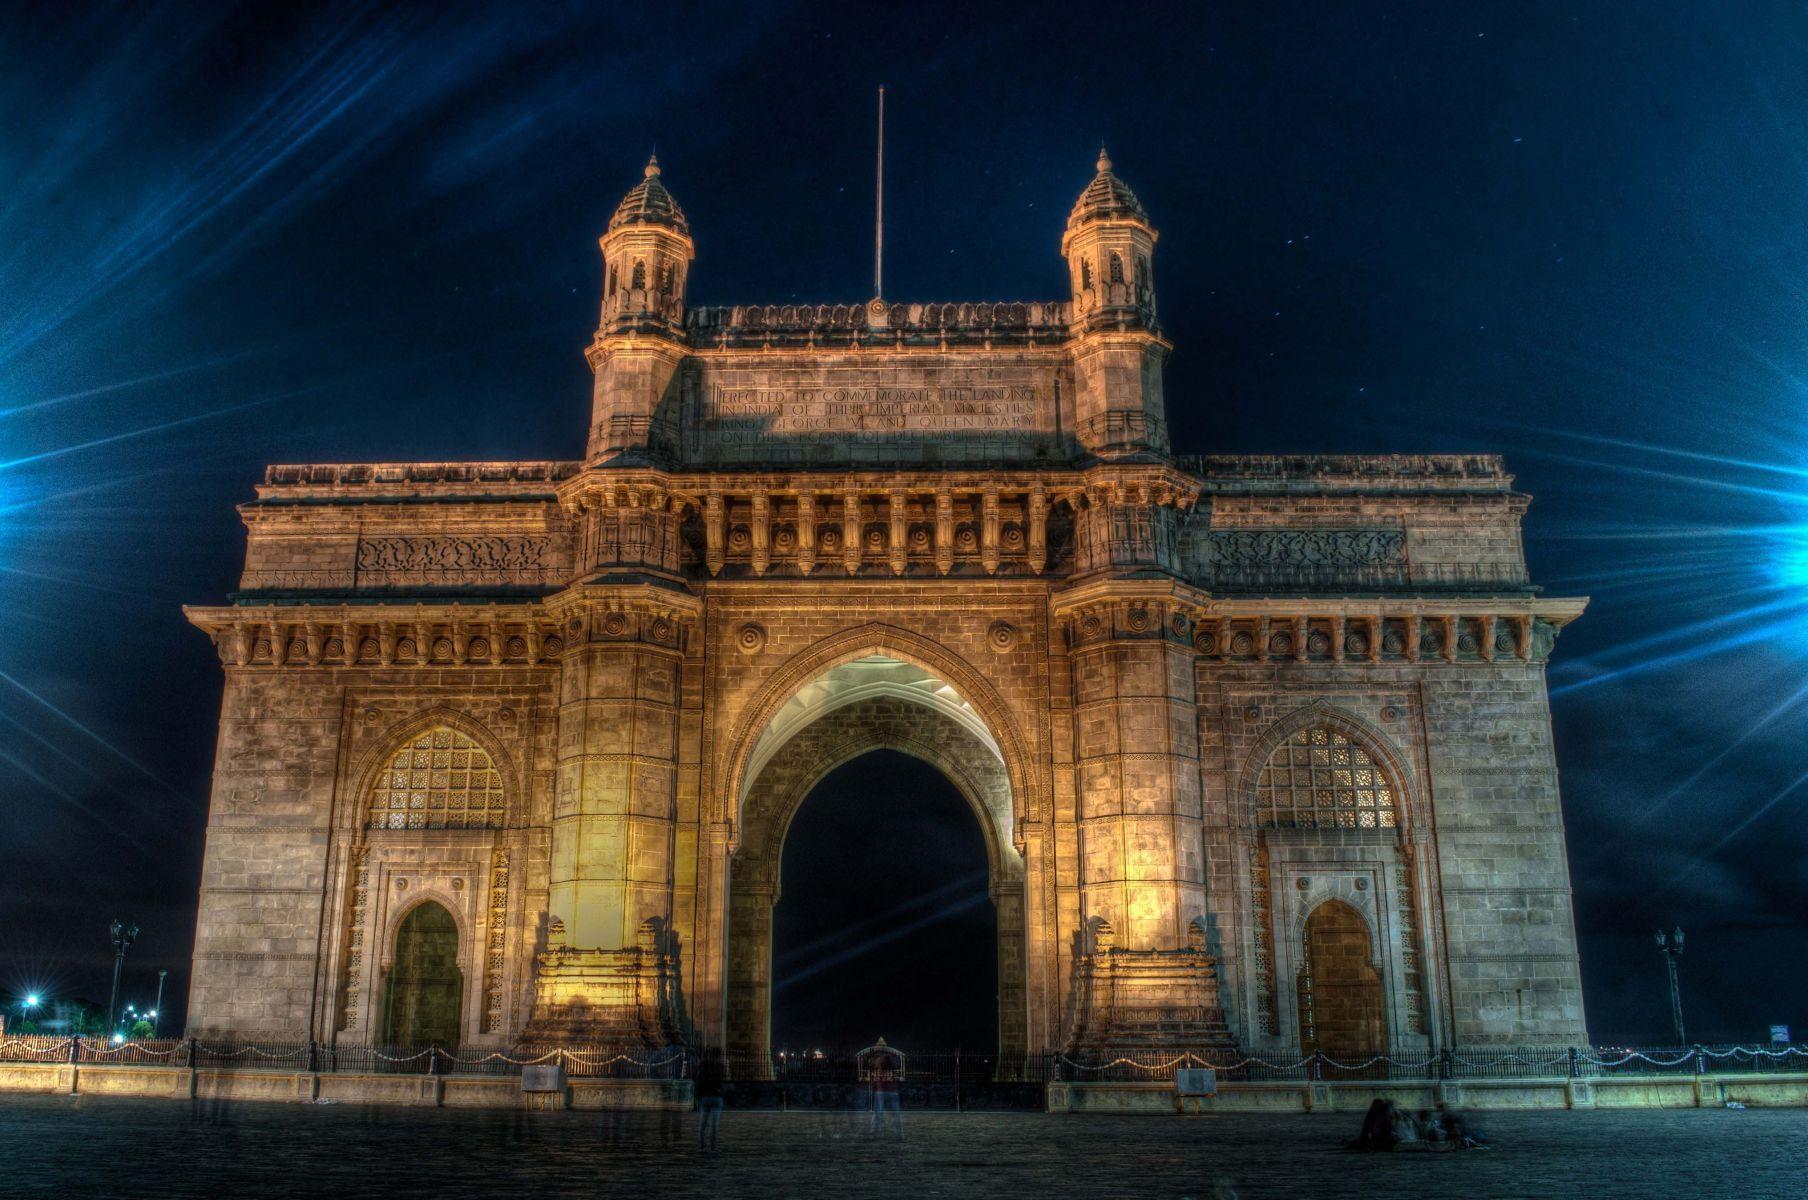 At Night Picture Of Gateway Of India. HD Travel Wallpaper For Mobile And Desktop